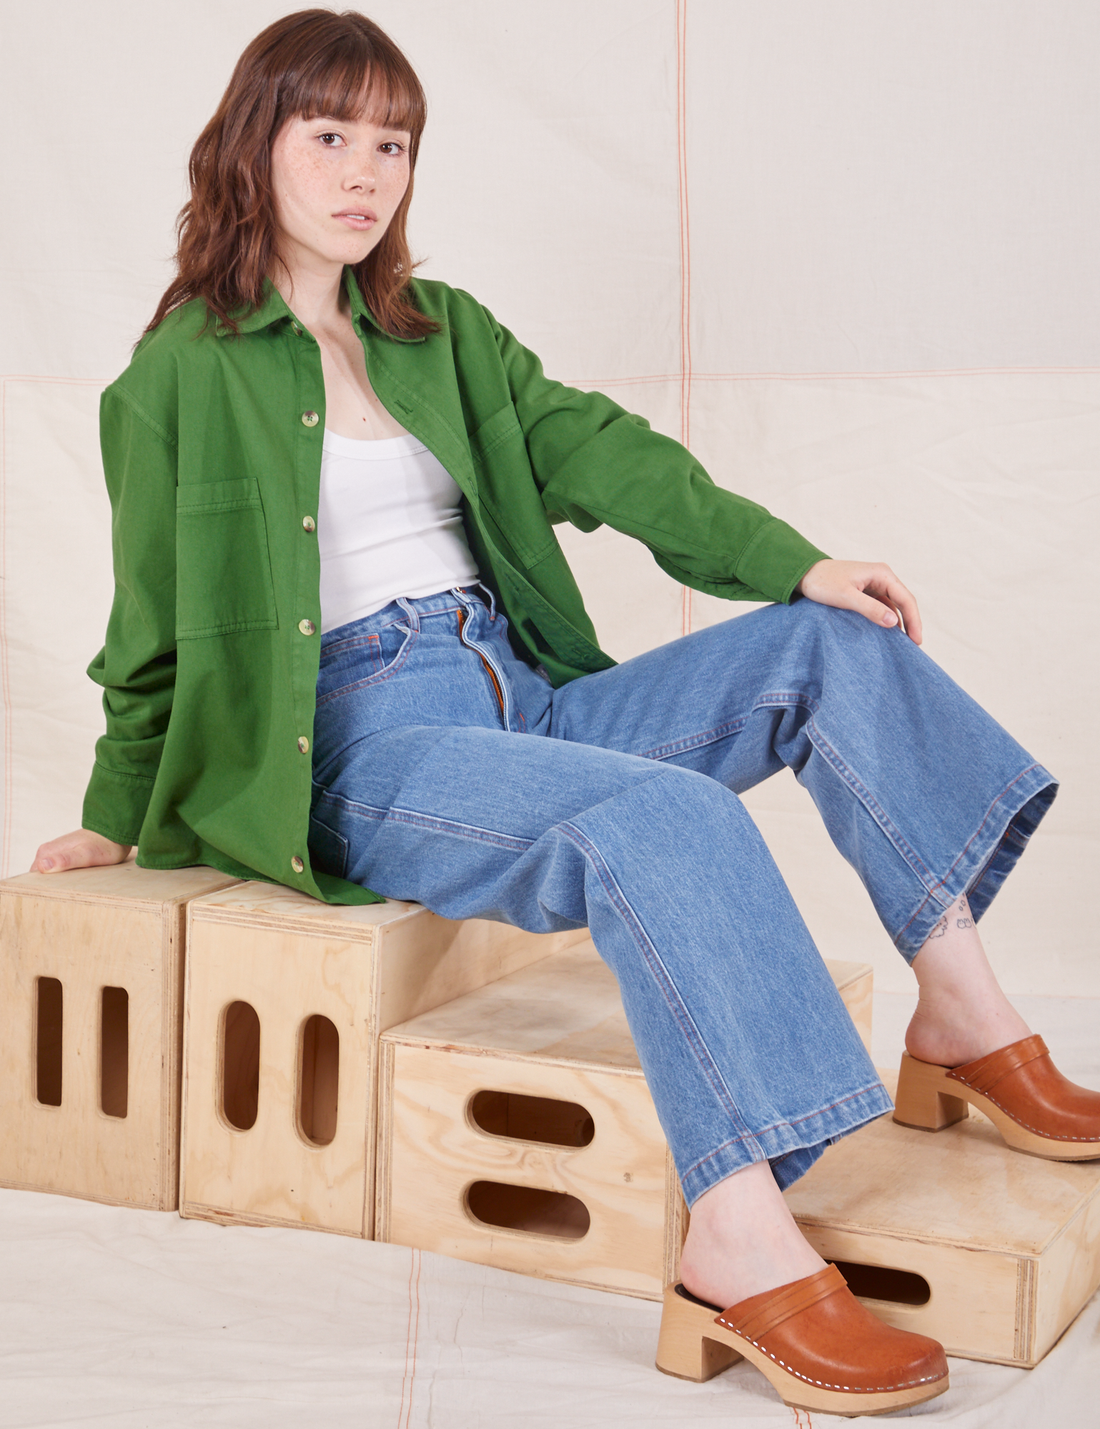 Hana is wearing Oversize Overshirt in Lawn Green, vintage off-white Cropped Tank Top and light wash Sailor Jeans